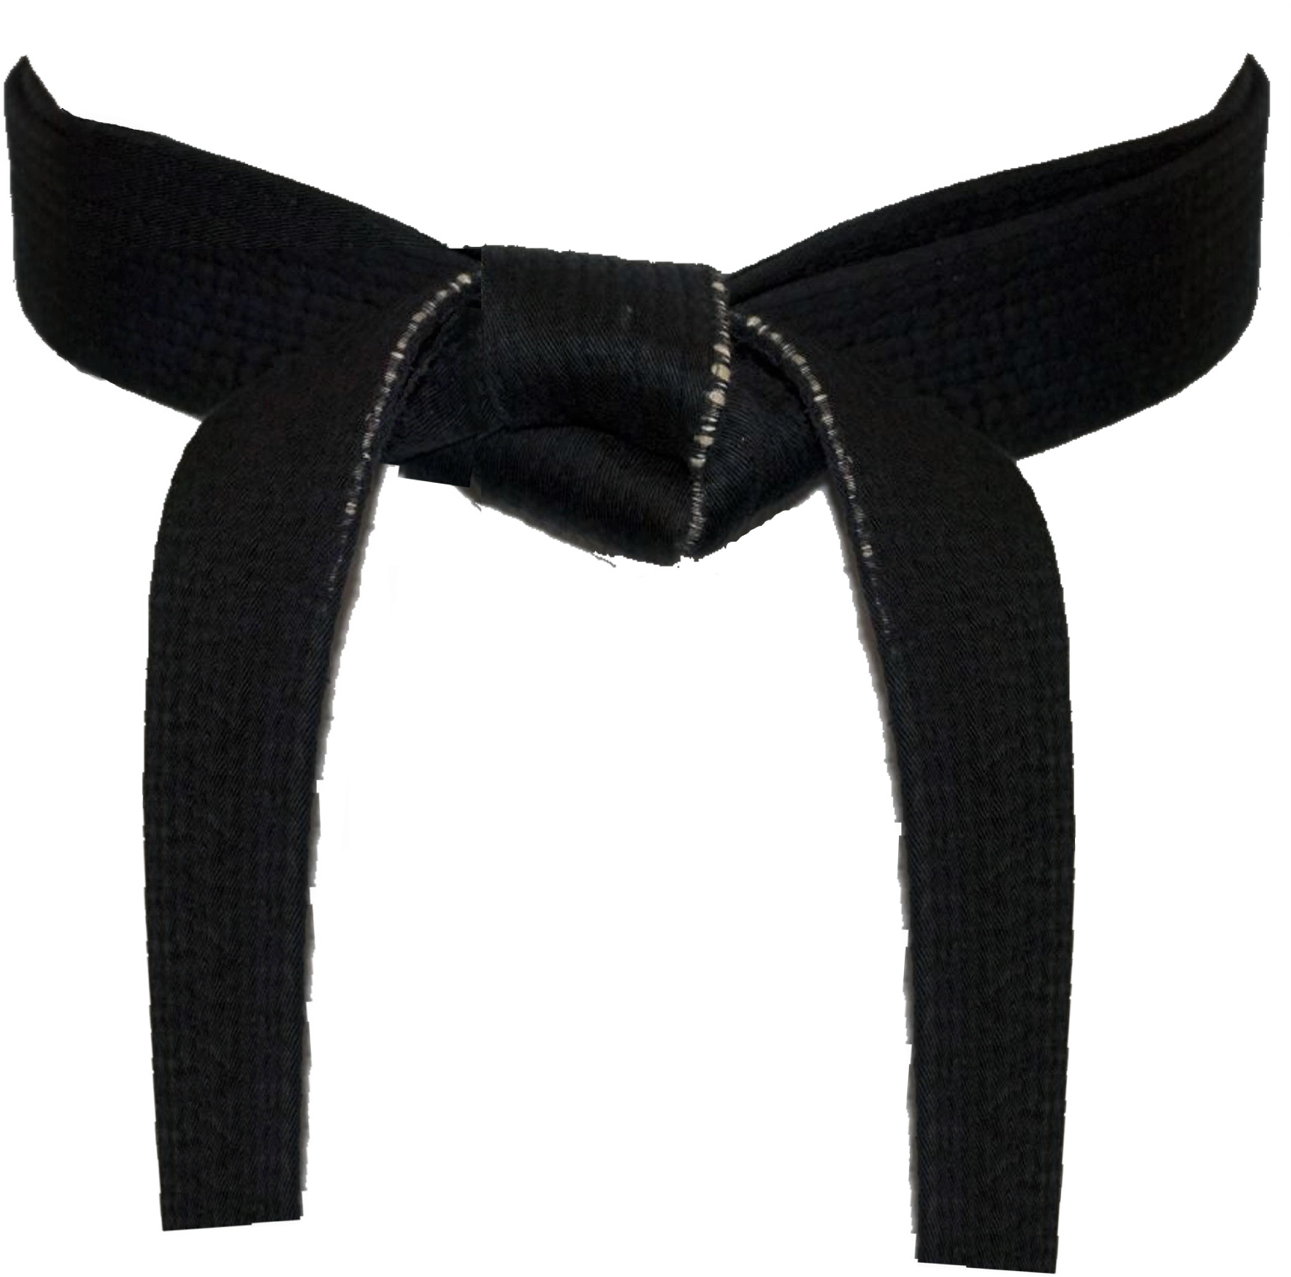 Black Fabric Belt Tied Knot PNG